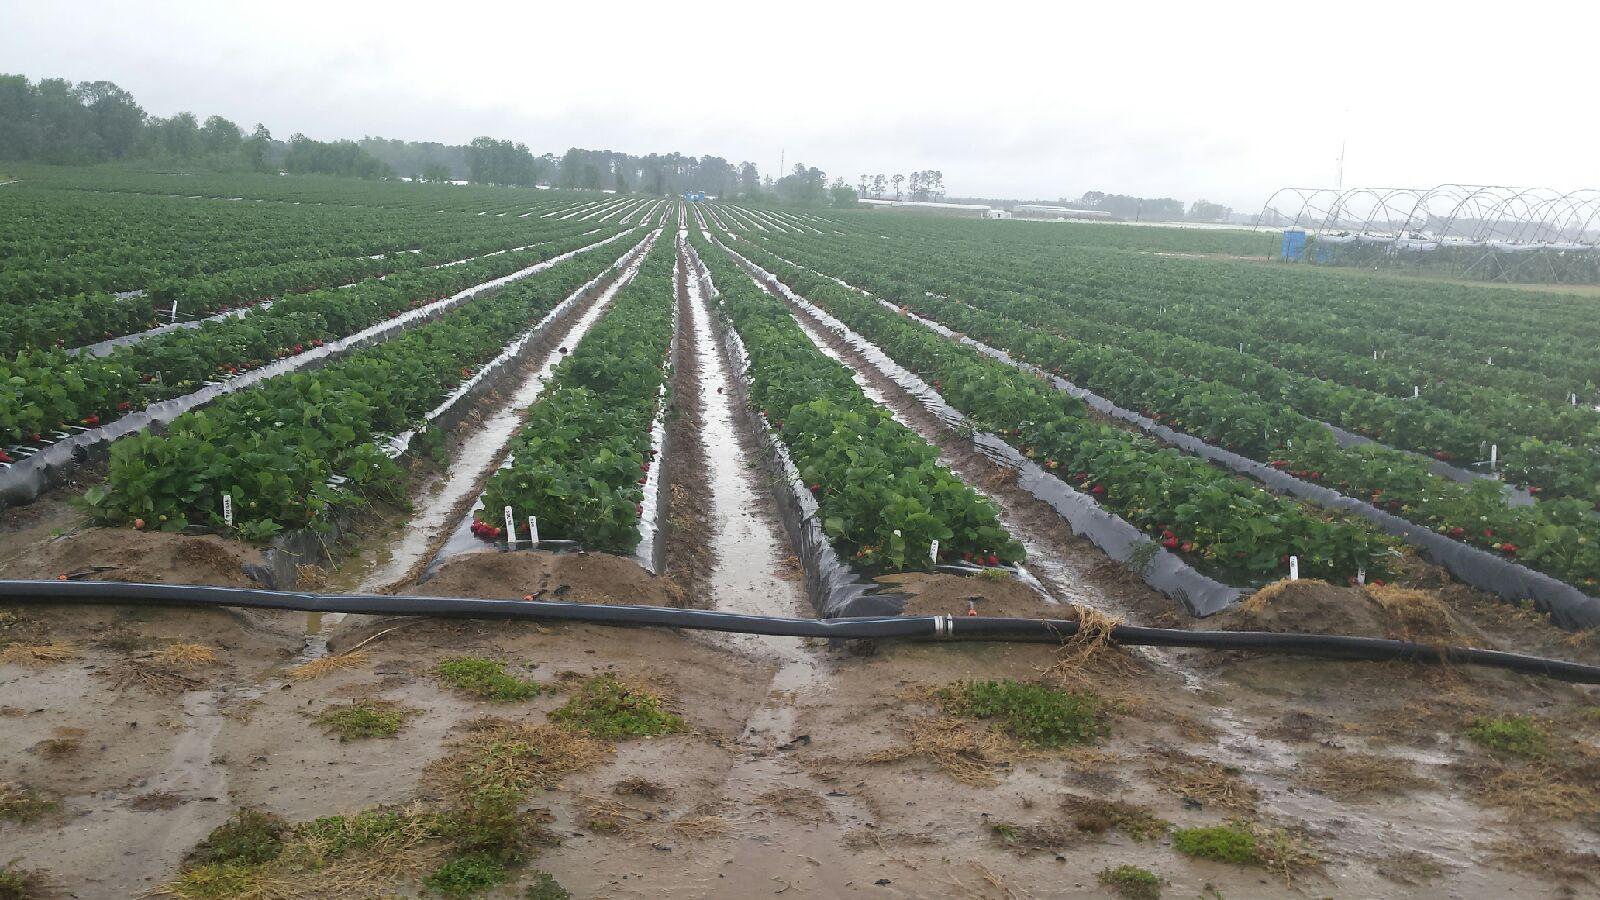 test plots with standing water in aisles